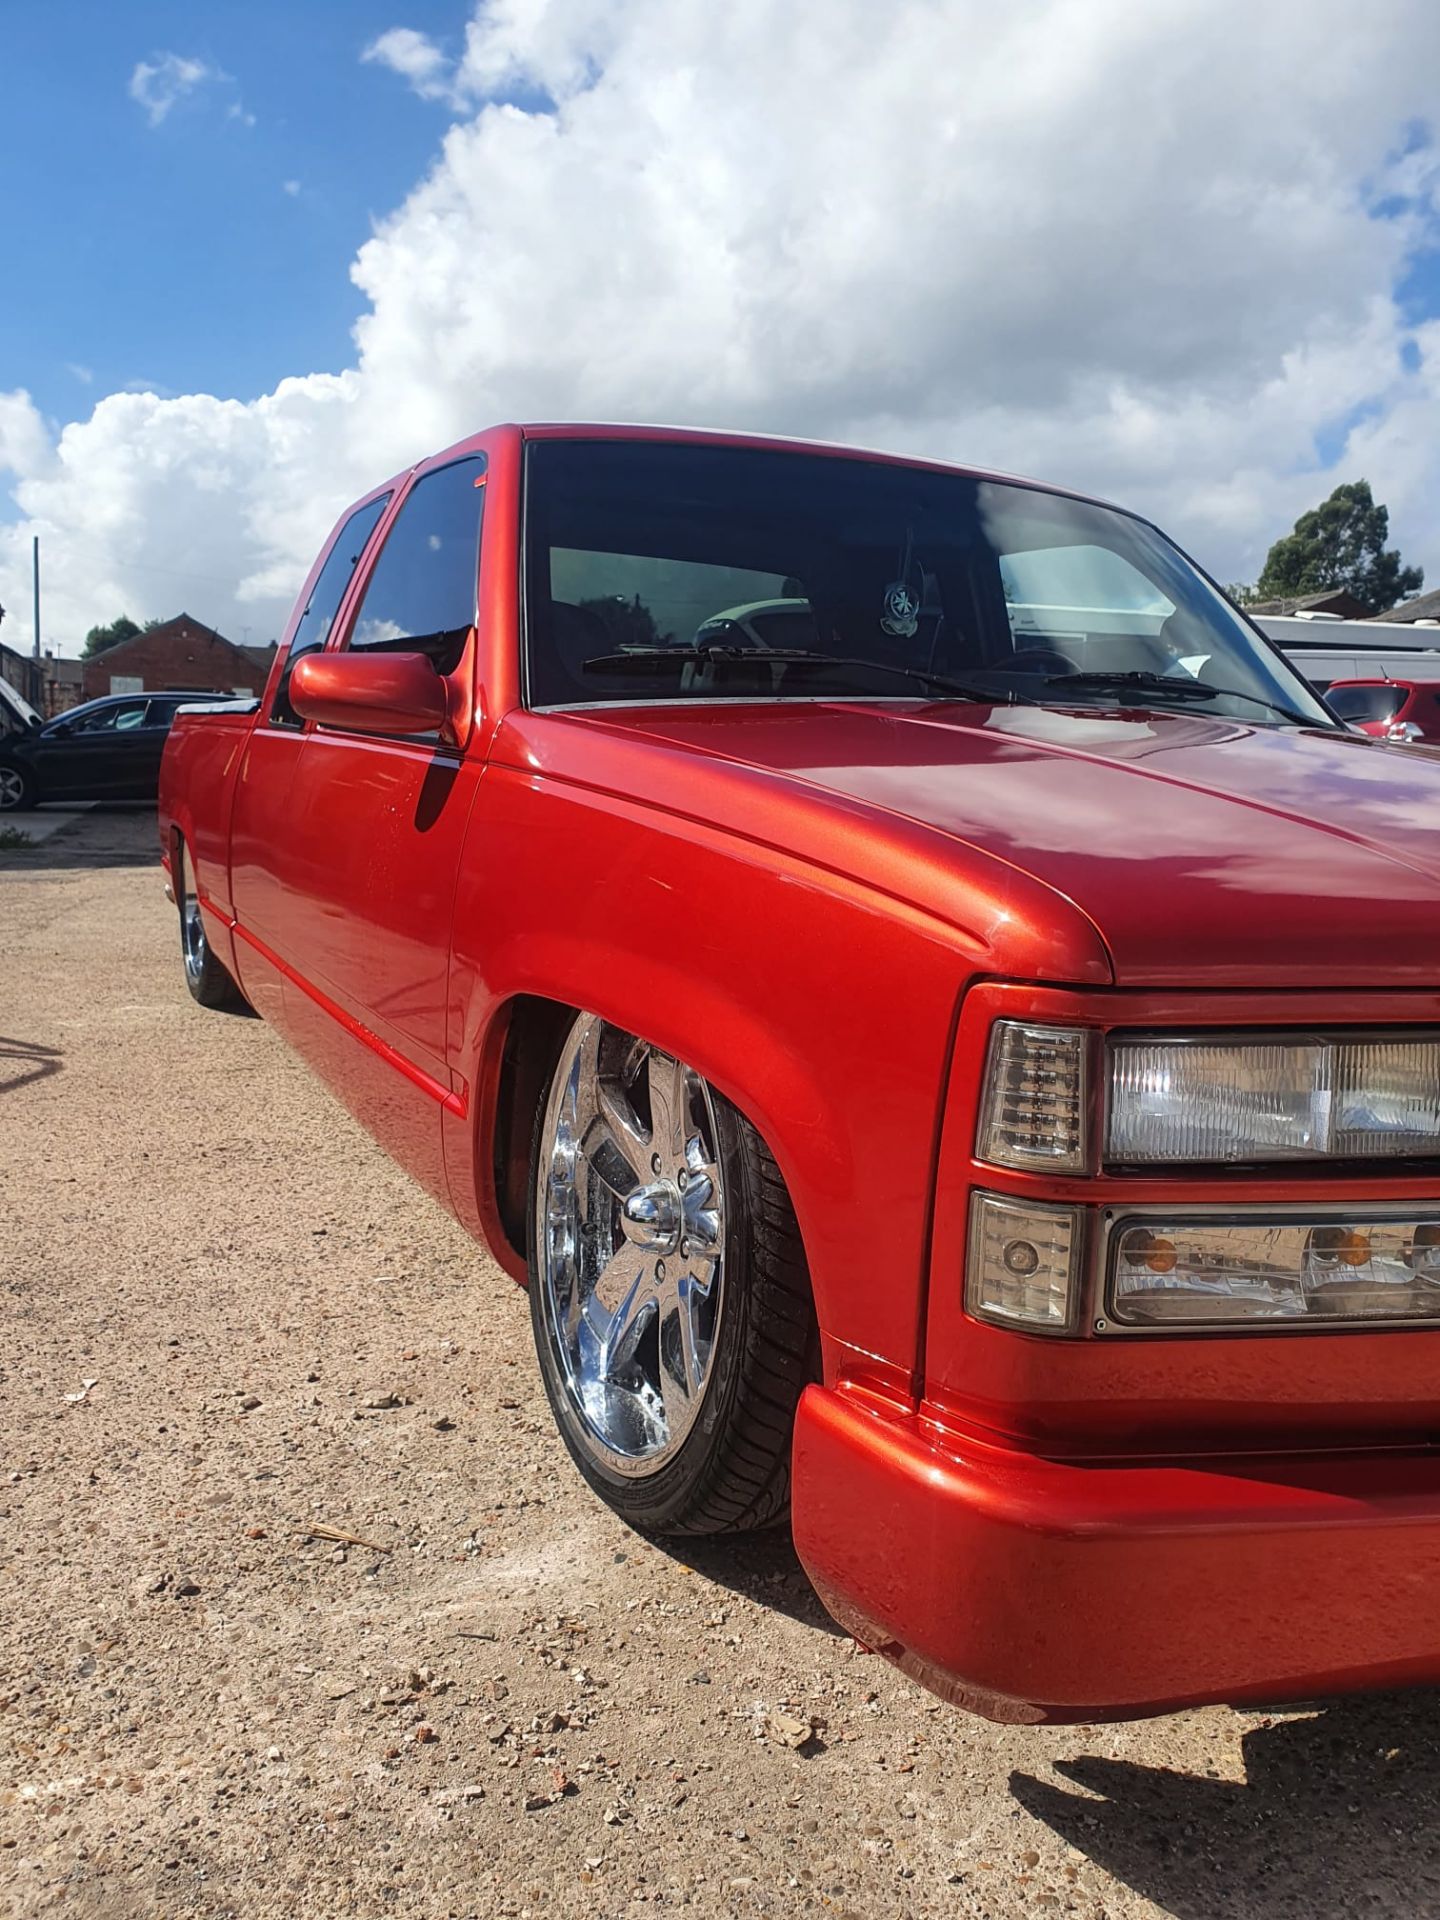 1994 CHEVROLET GMC SIERRA C1500 RED LCV WITH SUPERCHARGER *NO VAT* - Image 2 of 3